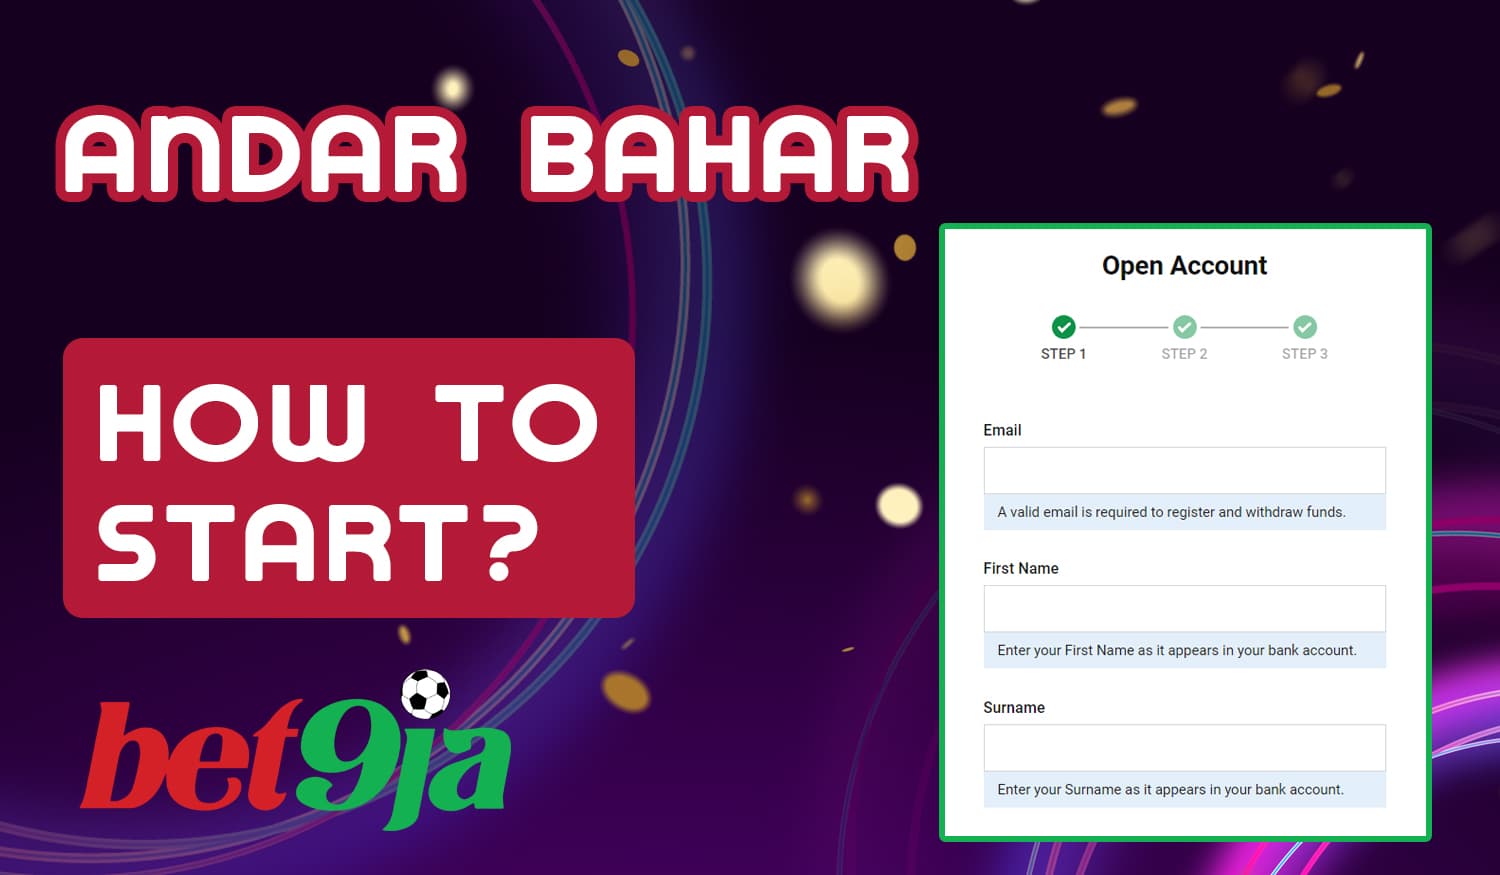 Step by step instructions to start playing Andar Bahar at Bet9ja casino